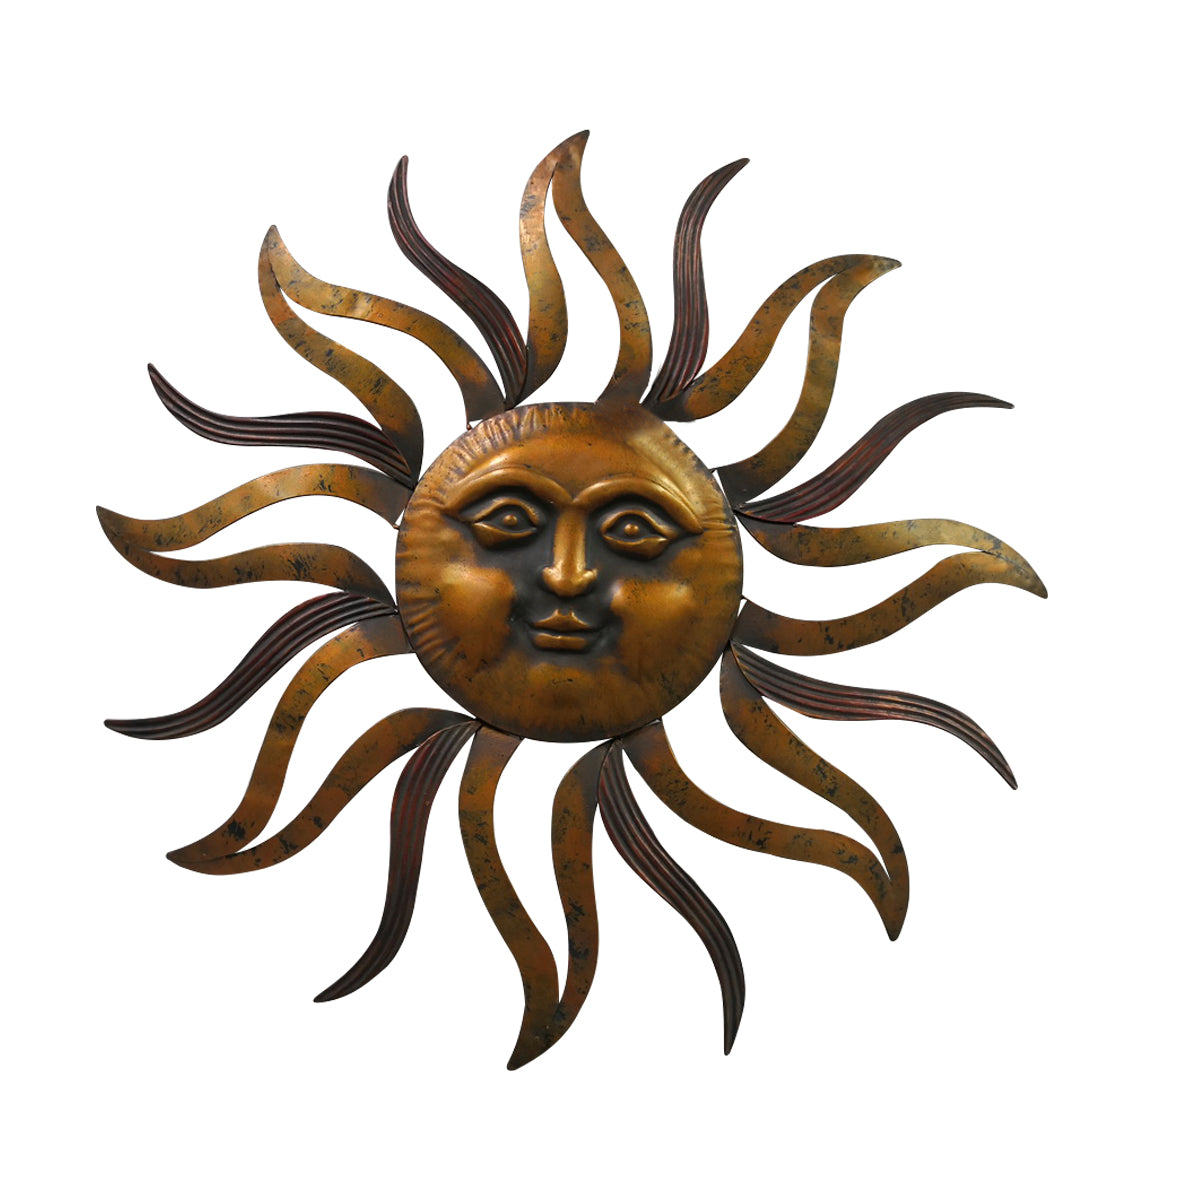 35 Inch Round Hanging Metal Sun Wall Art Decor with Facial Details, Bronze - BM07981